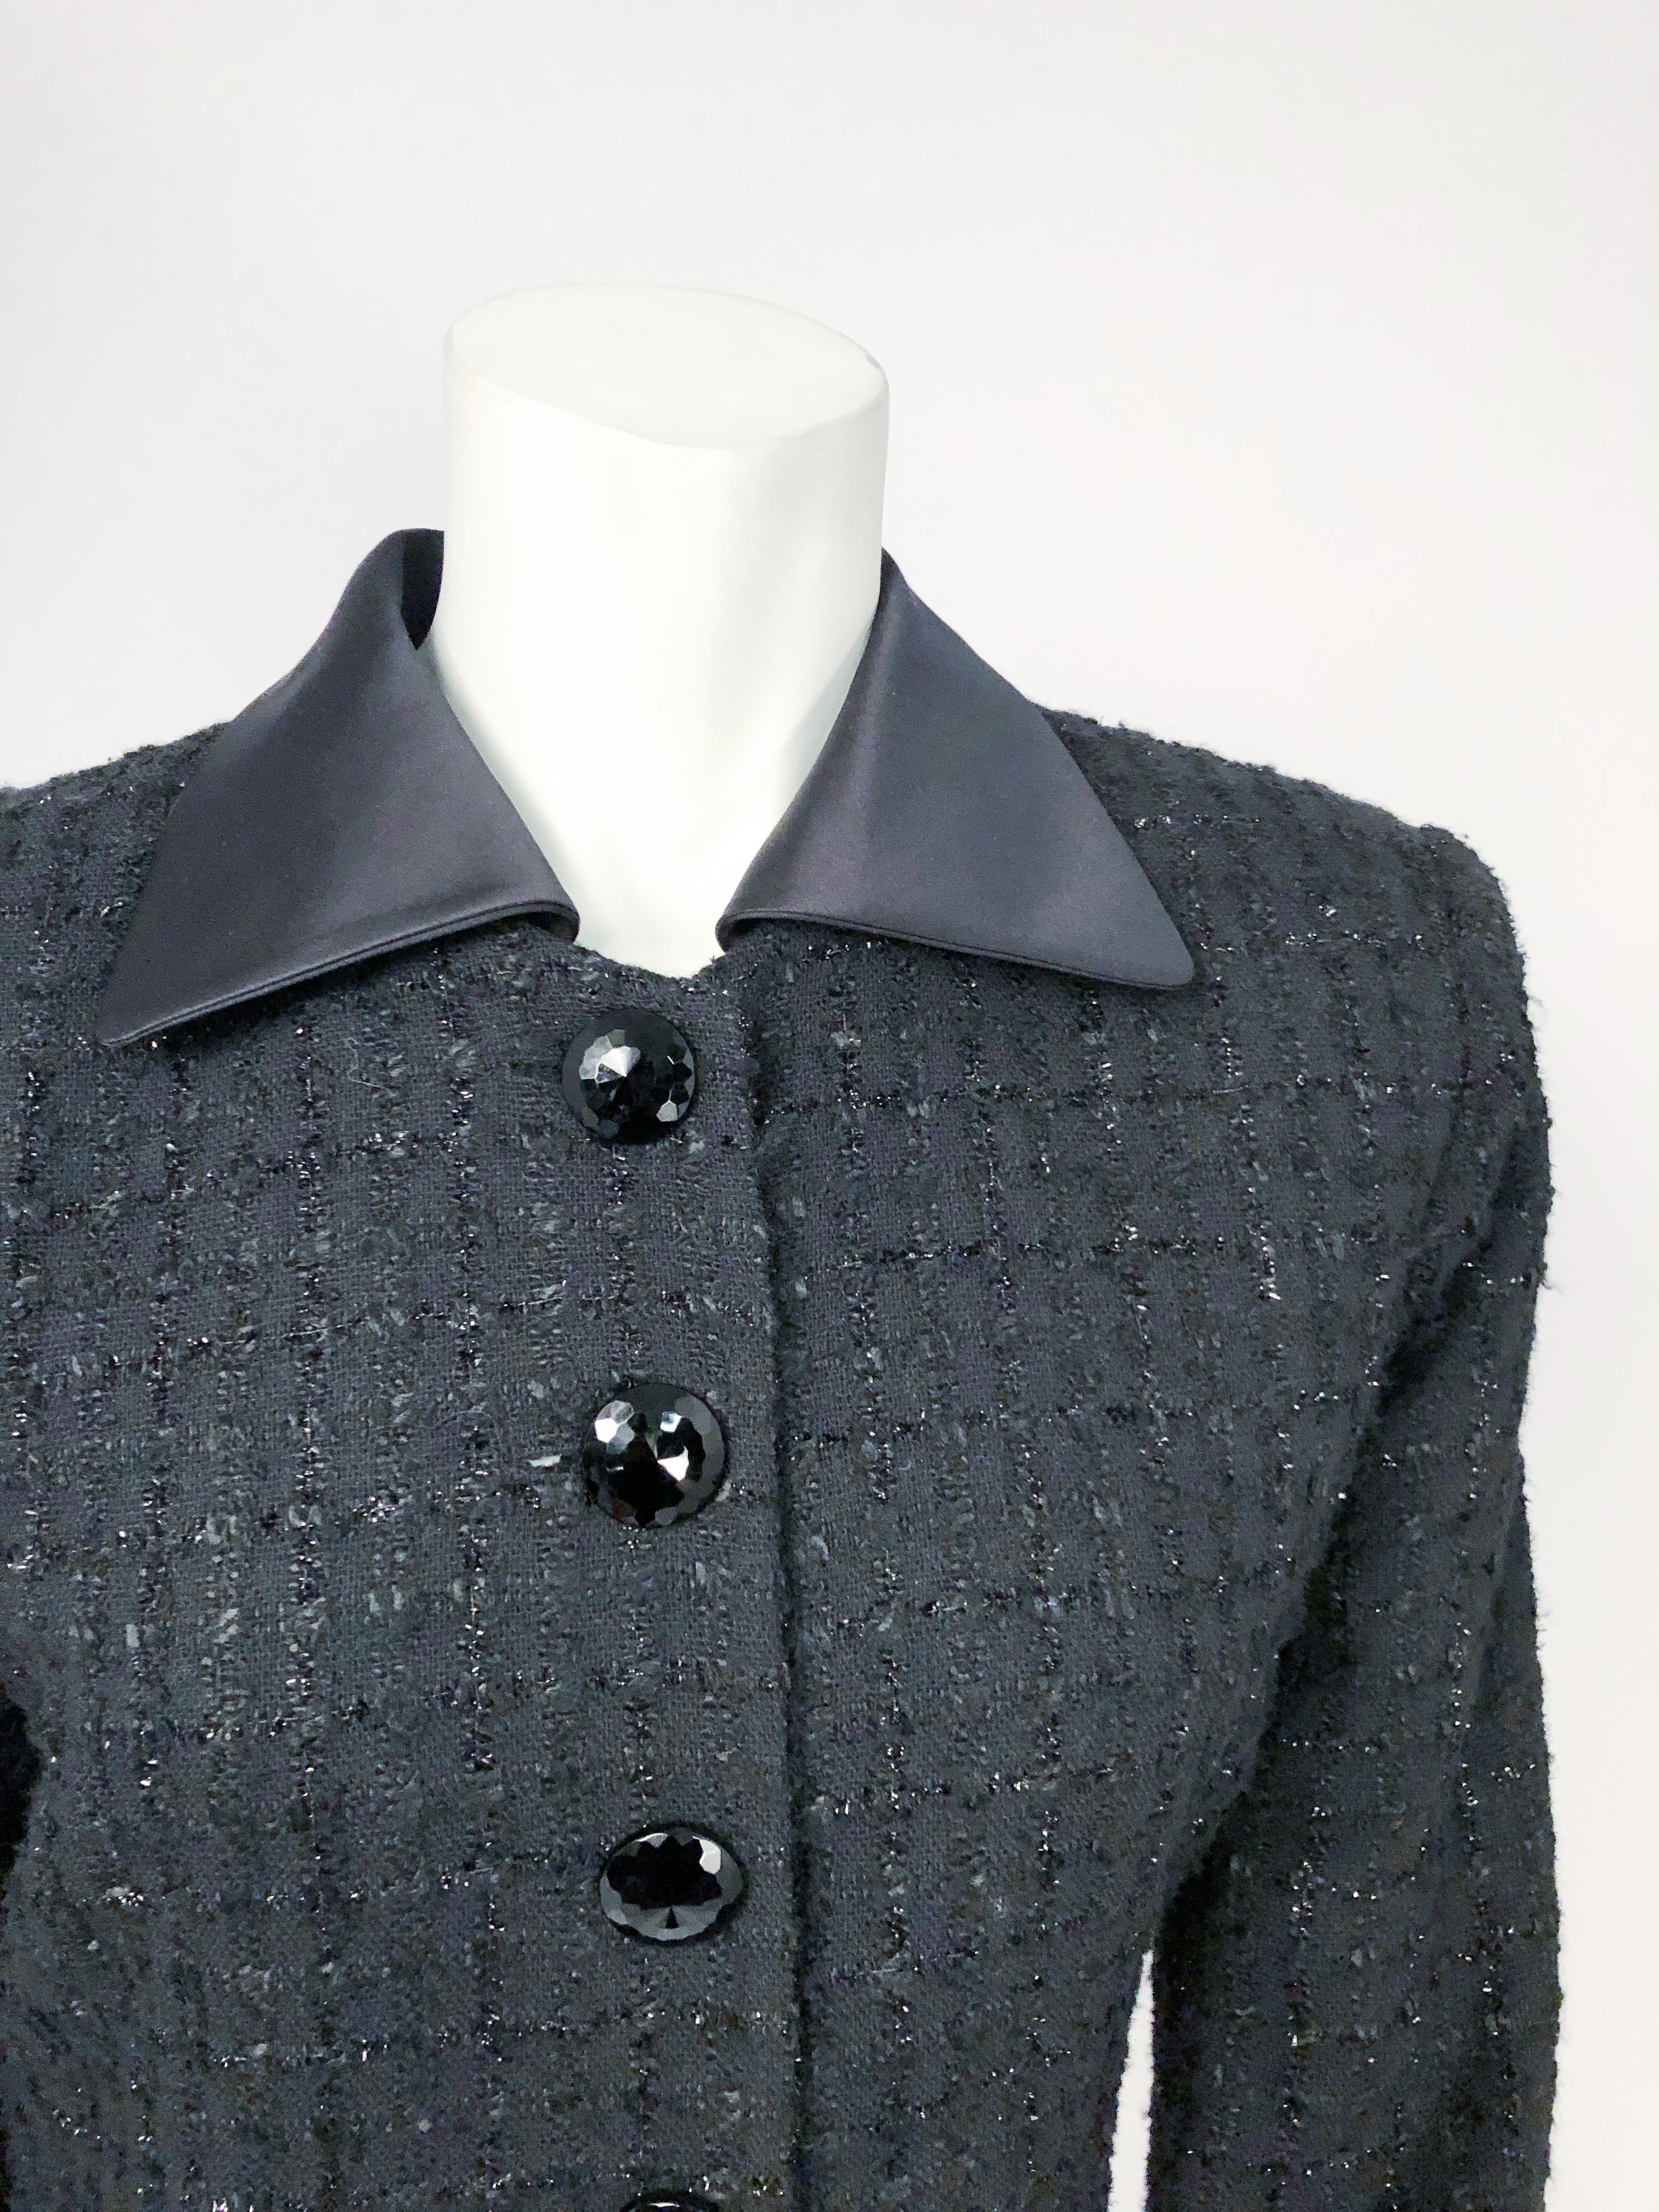 1990s Christian Dior Black and black Metallic Tweed Suit with oversized glass buttons, satin collar and winged cuffs. The collar and cuffs are removable to make this ensemble wearable during the day and the night.